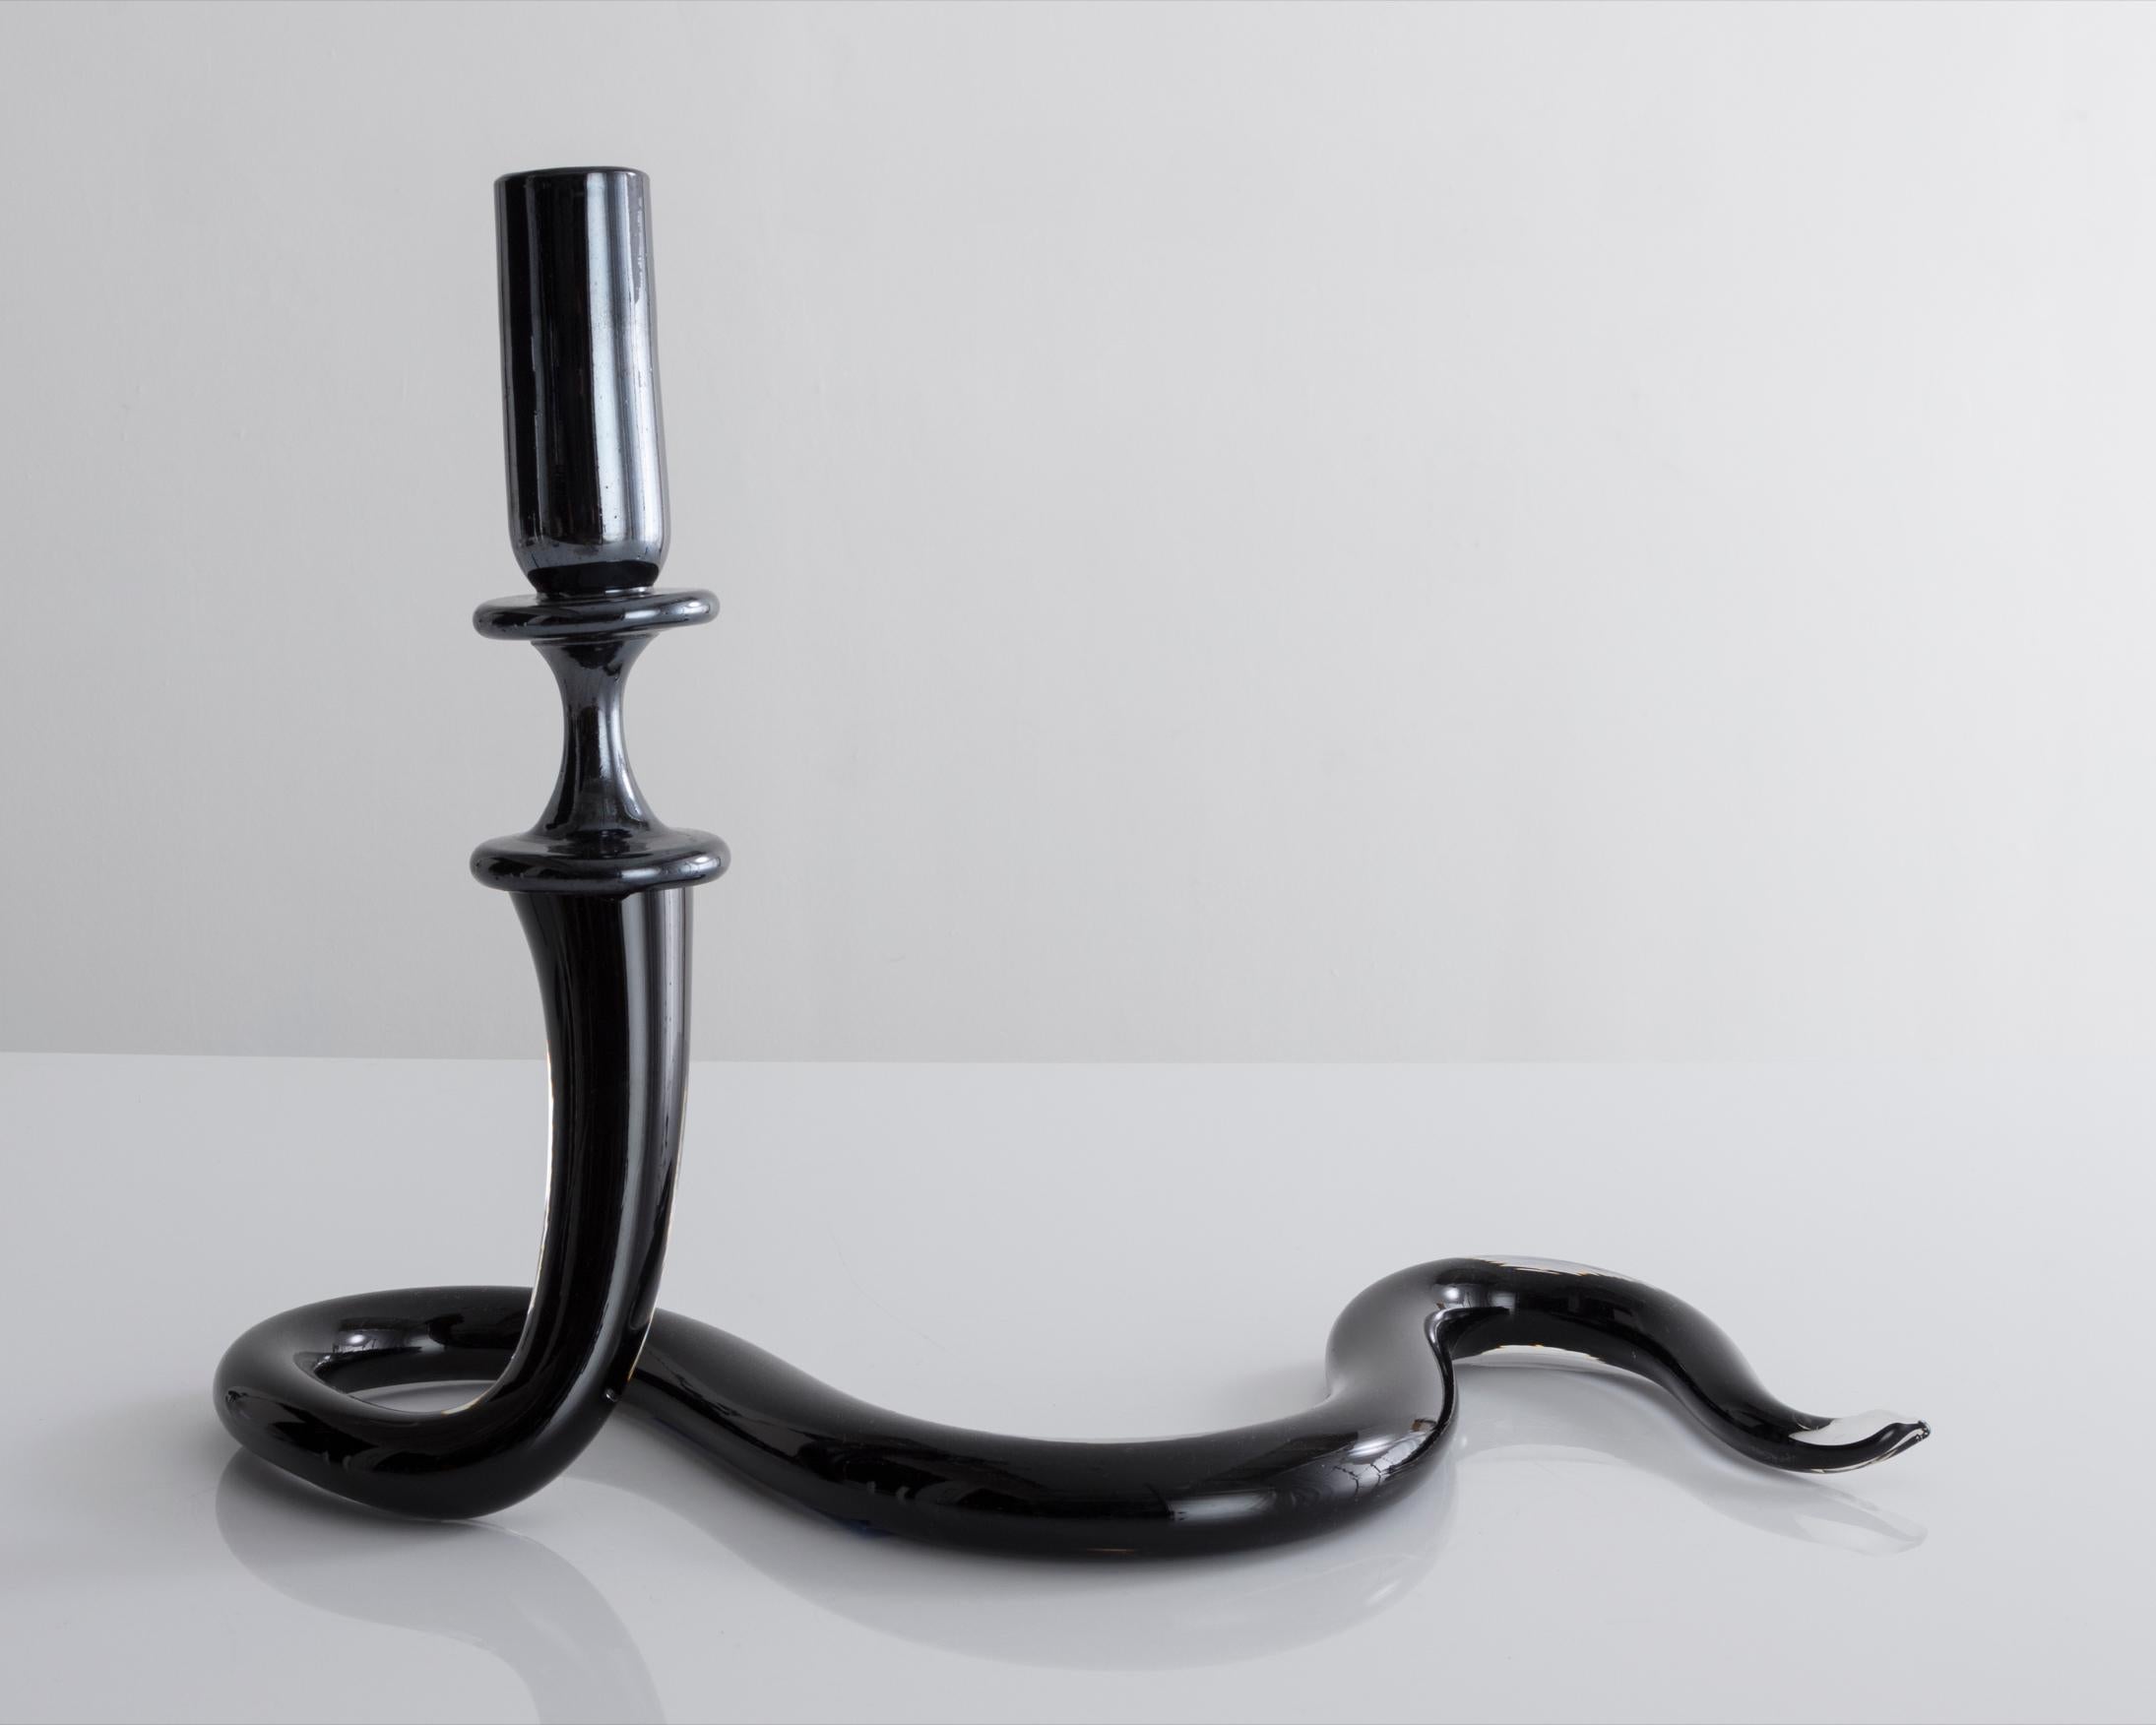 Unique single serpentine light sculpture in black hand blown glass. Designed and made by Jeff Zimmerman, USA, 2017.

Limited number available. Please note that each item may differ slightly in color and shape.